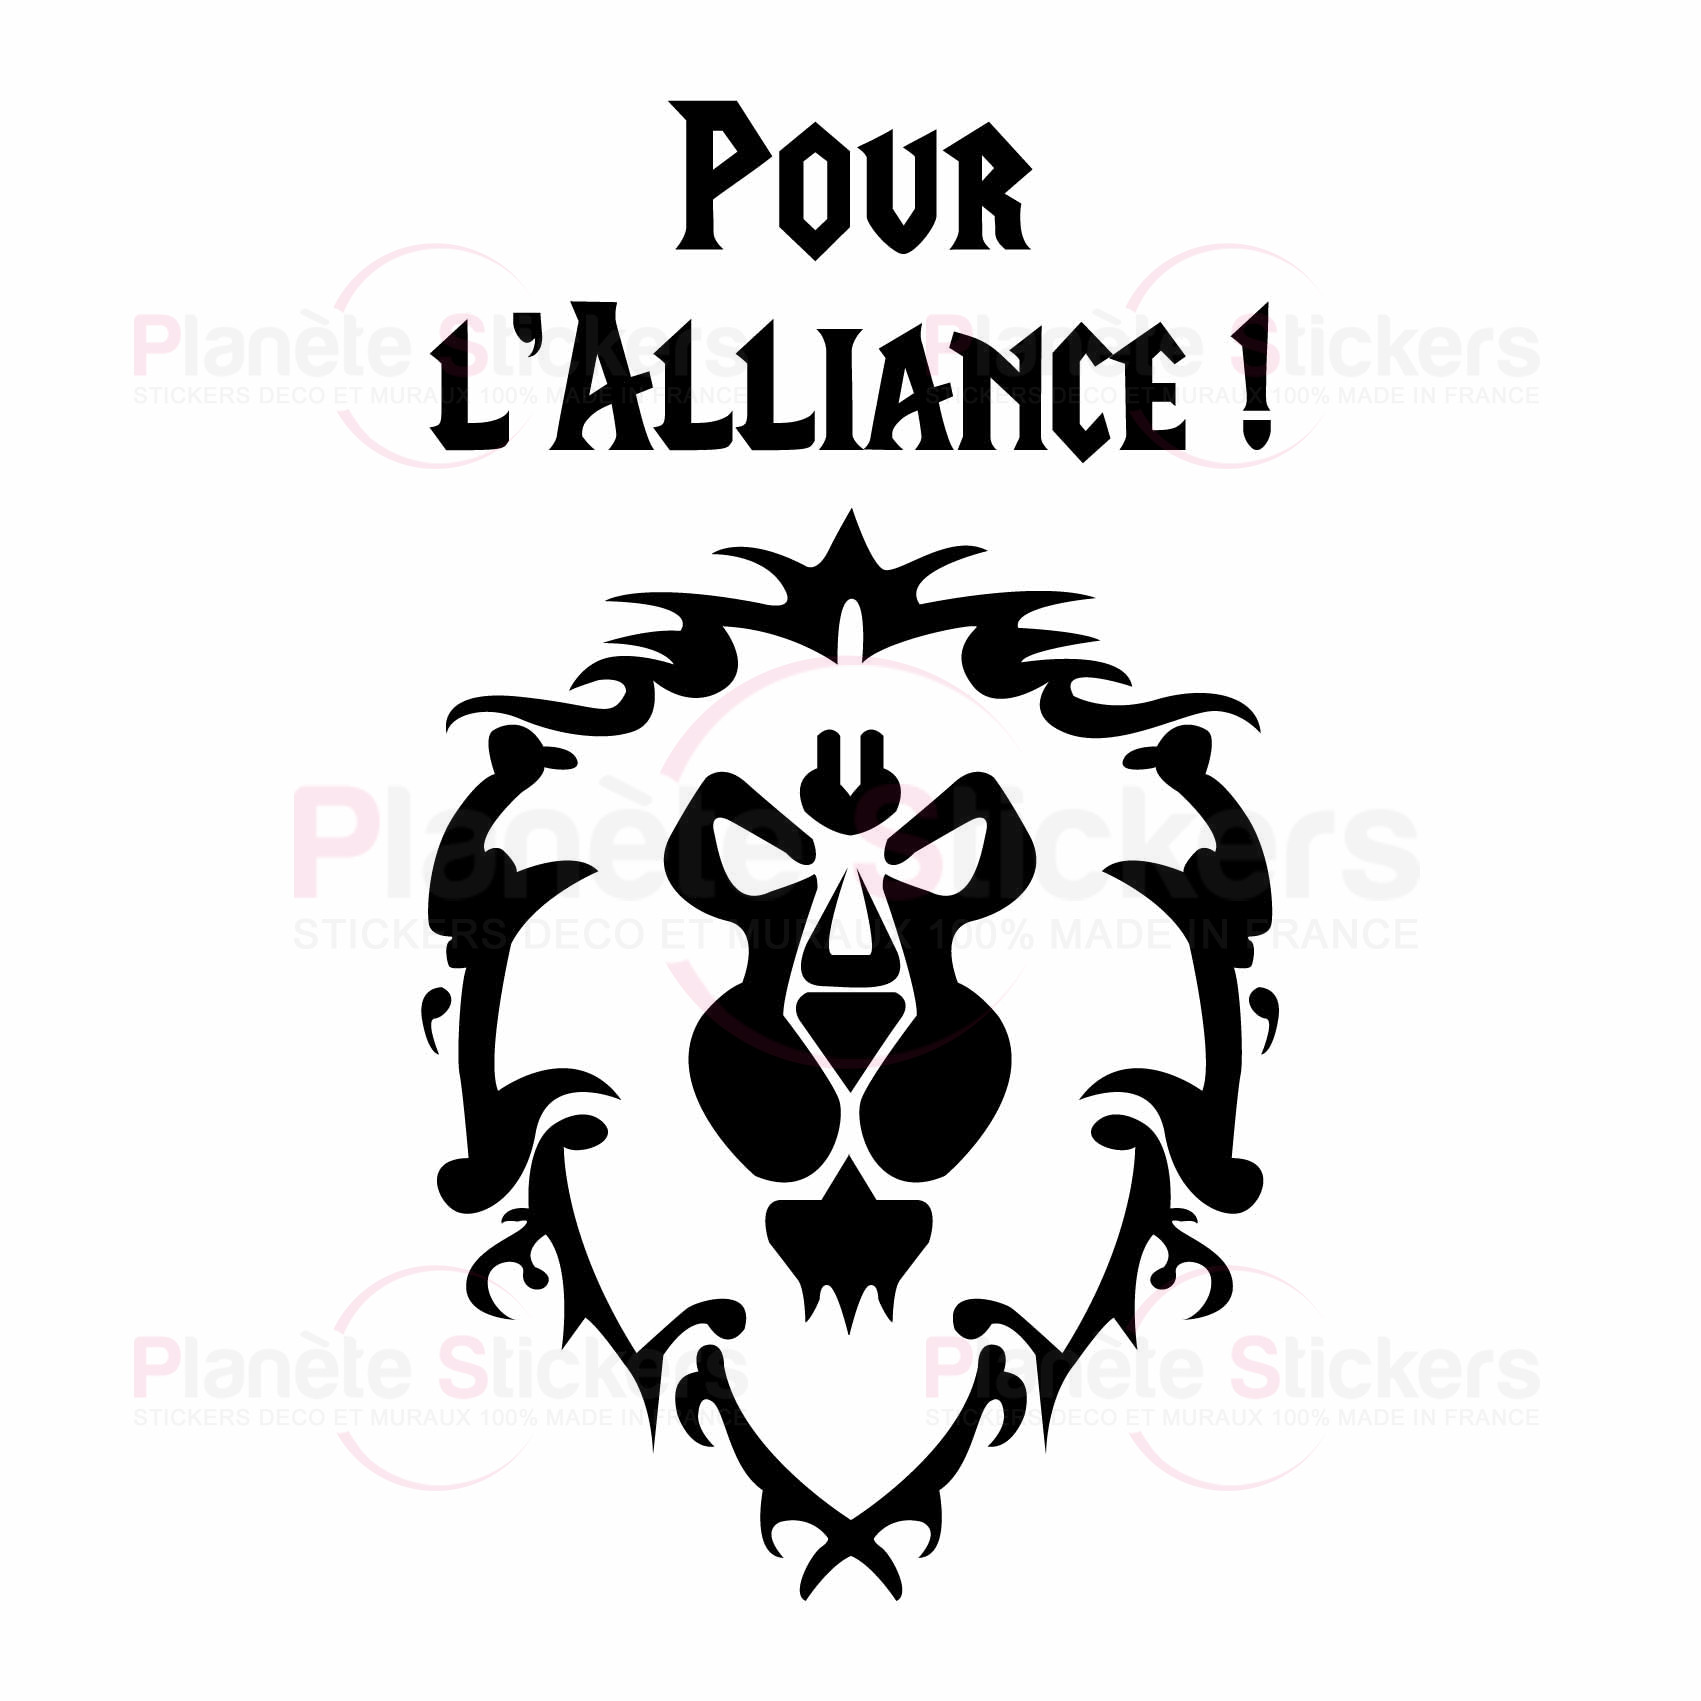 stickers-pour-l-alliance-world-of-warcraft-ref11wow-stickers-muraux-world-of-warcraft-autocollant-mural-jeux-video-sticker-gamer-deco-gaming-salon-chambre-(2)